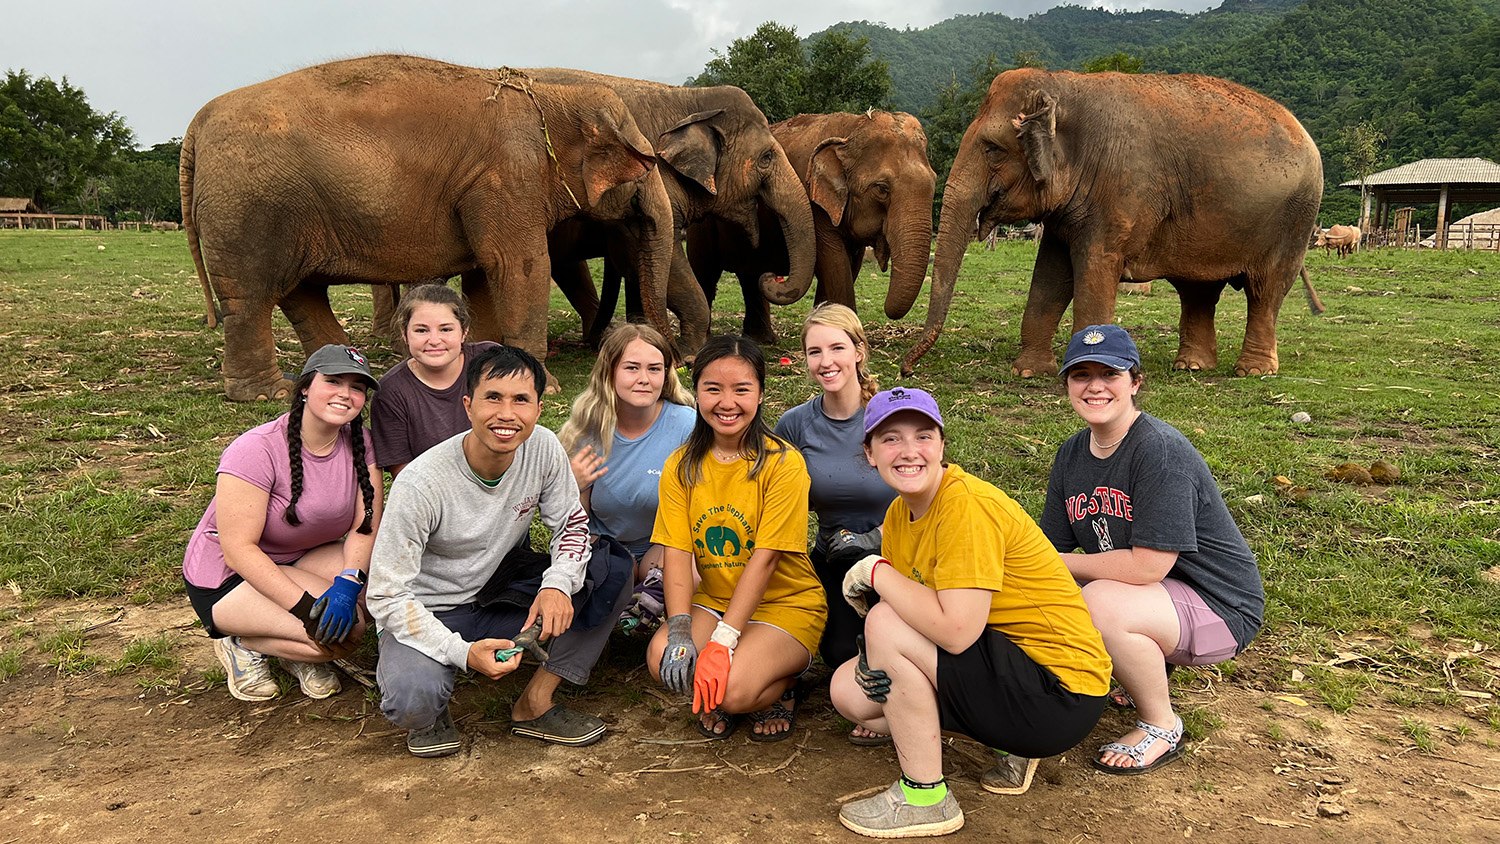 Group of students kneeling with elephants in background